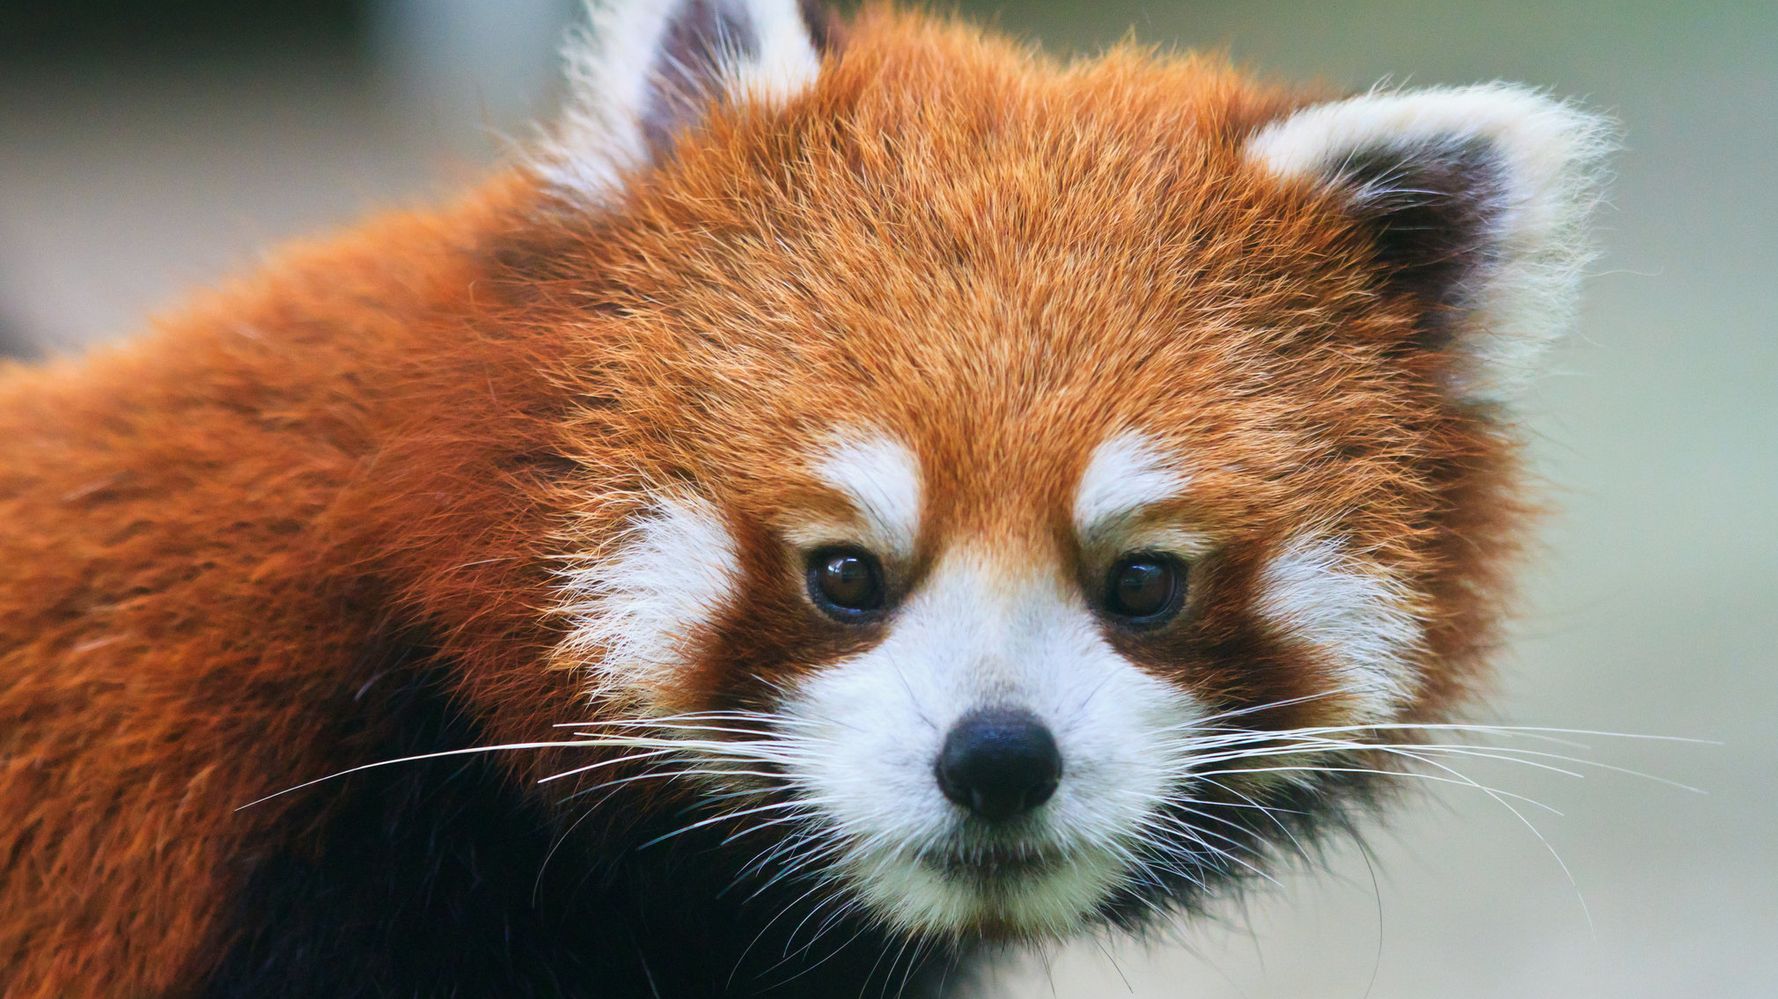 Zoo Streaming Red Pandas All Day To Ease Election Day Panda-monium | HuffPost